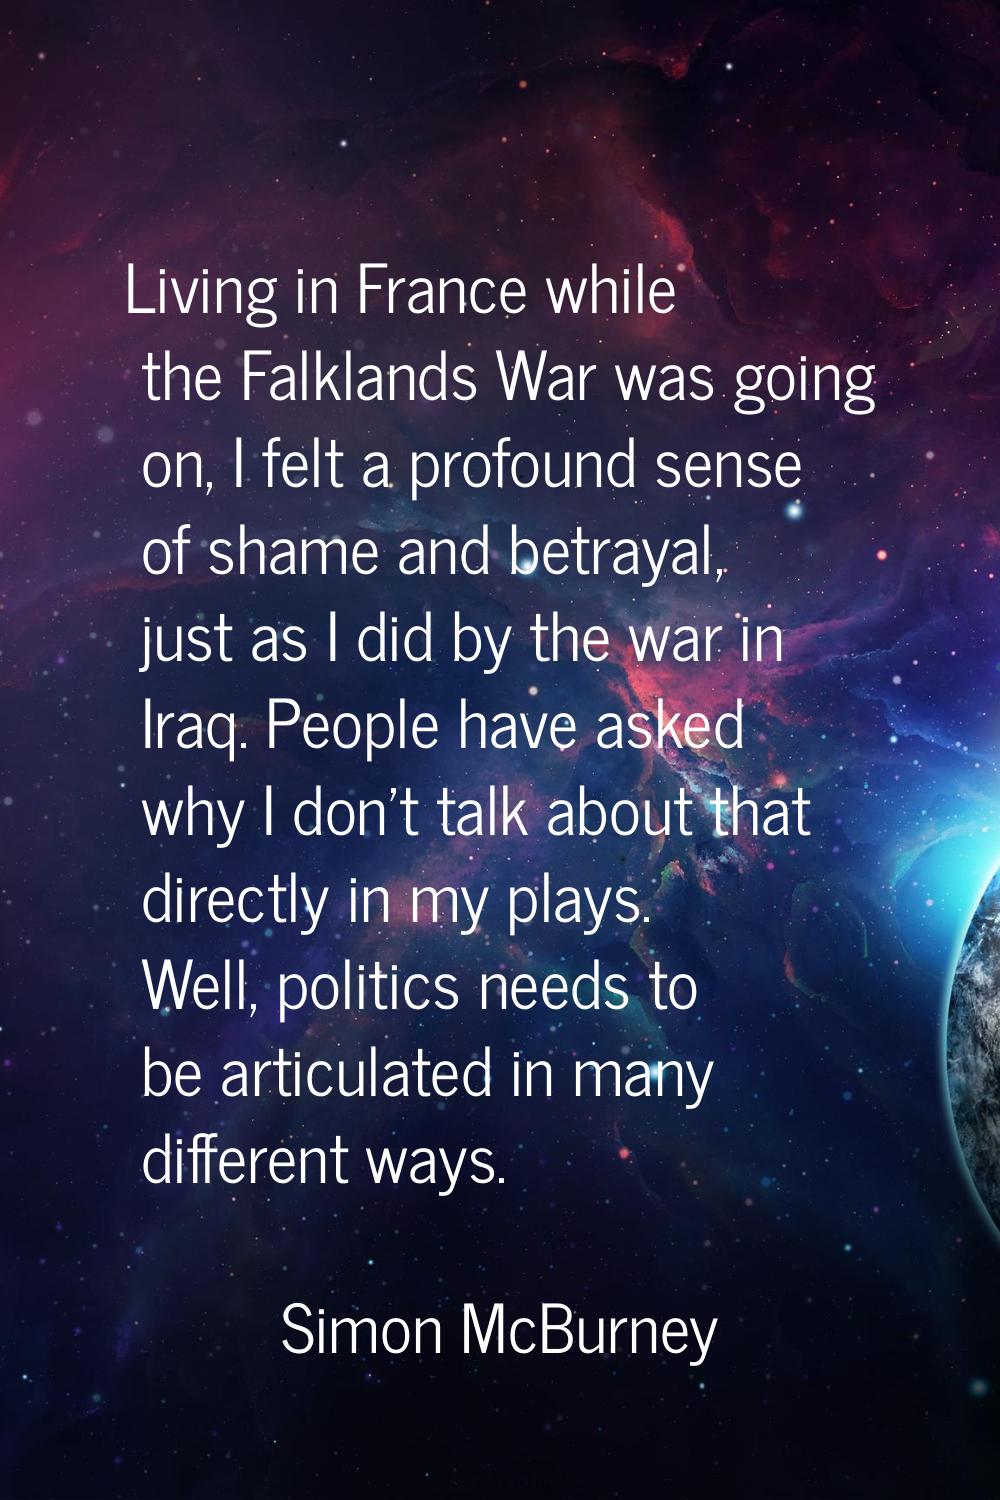 Living in France while the Falklands War was going on, I felt a profound sense of shame and betraya